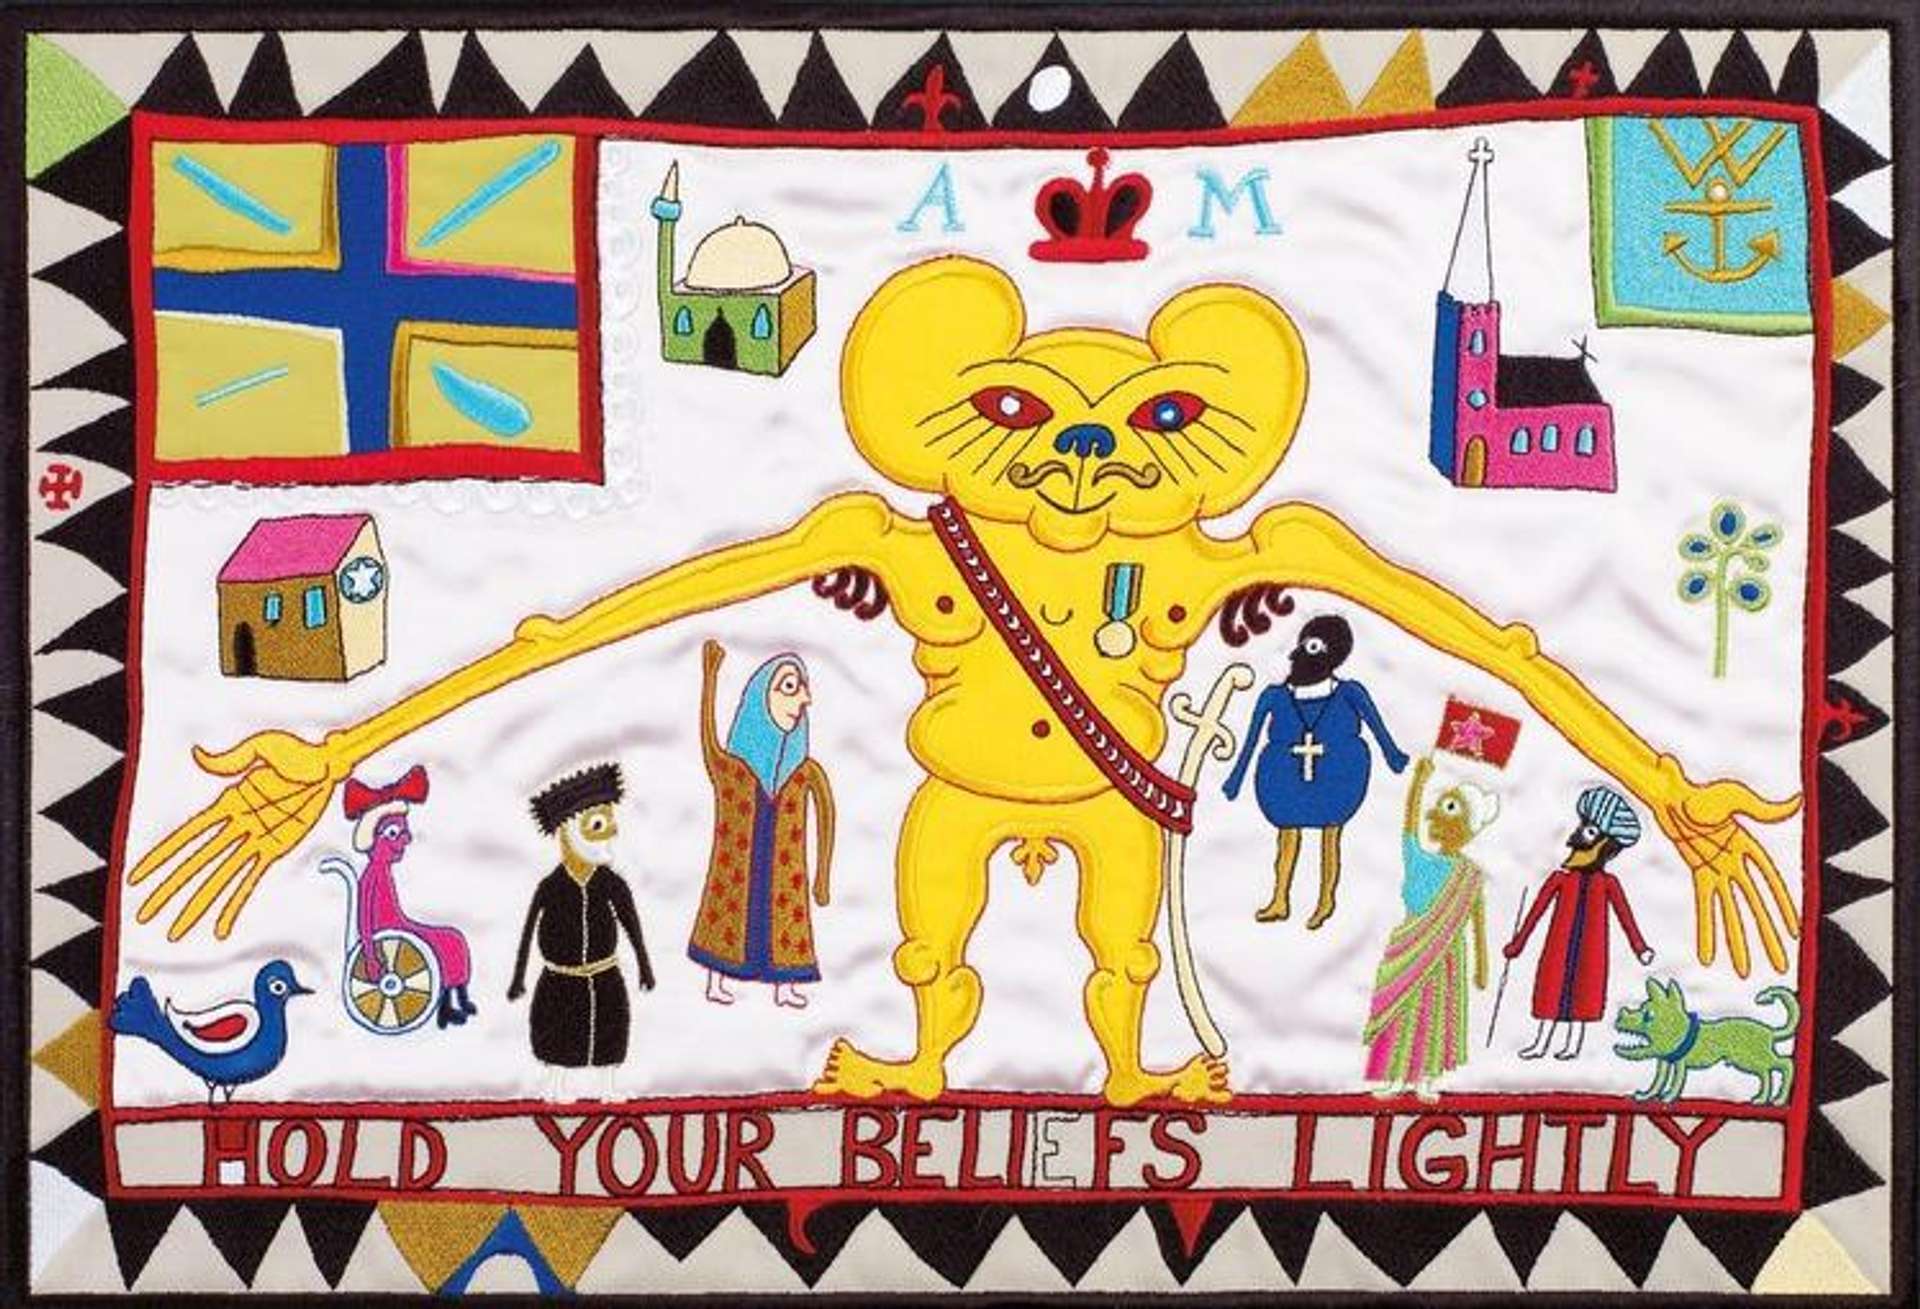 Embroidered tapestry with a diverse range of figures embraced in the the arms of a large yellow creature